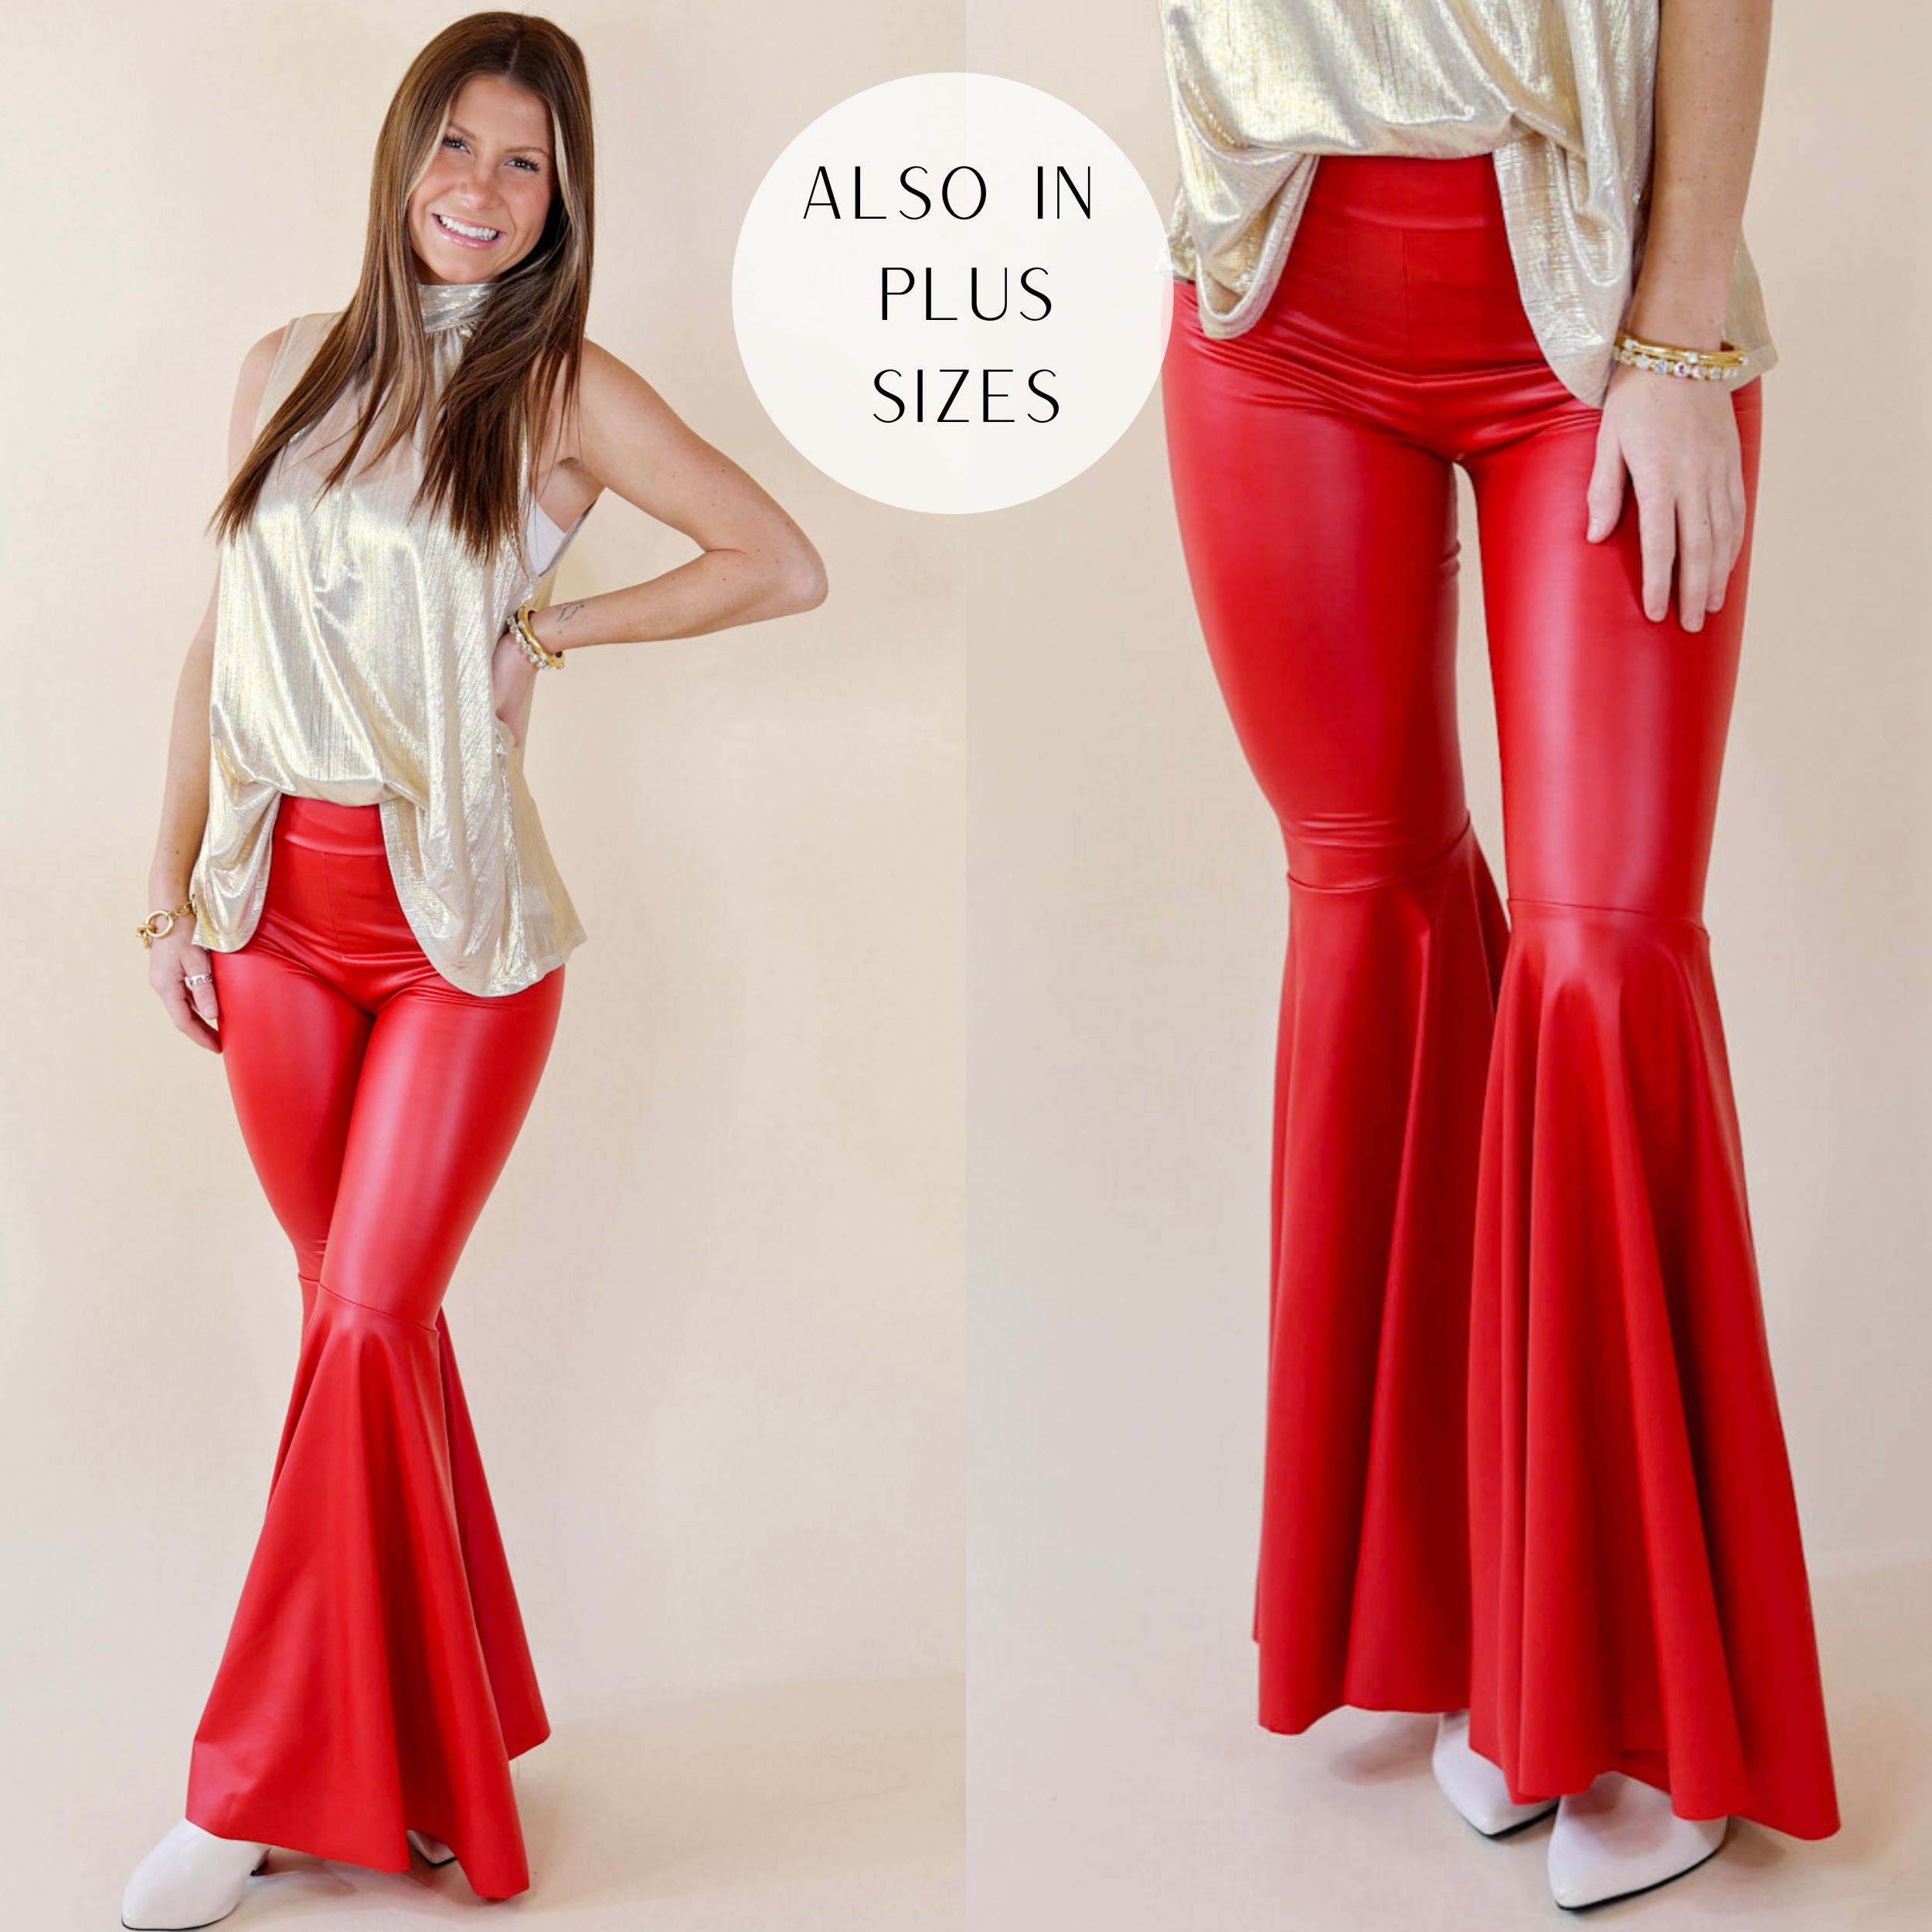 Faux Leather Bell Bottom Pants in Red